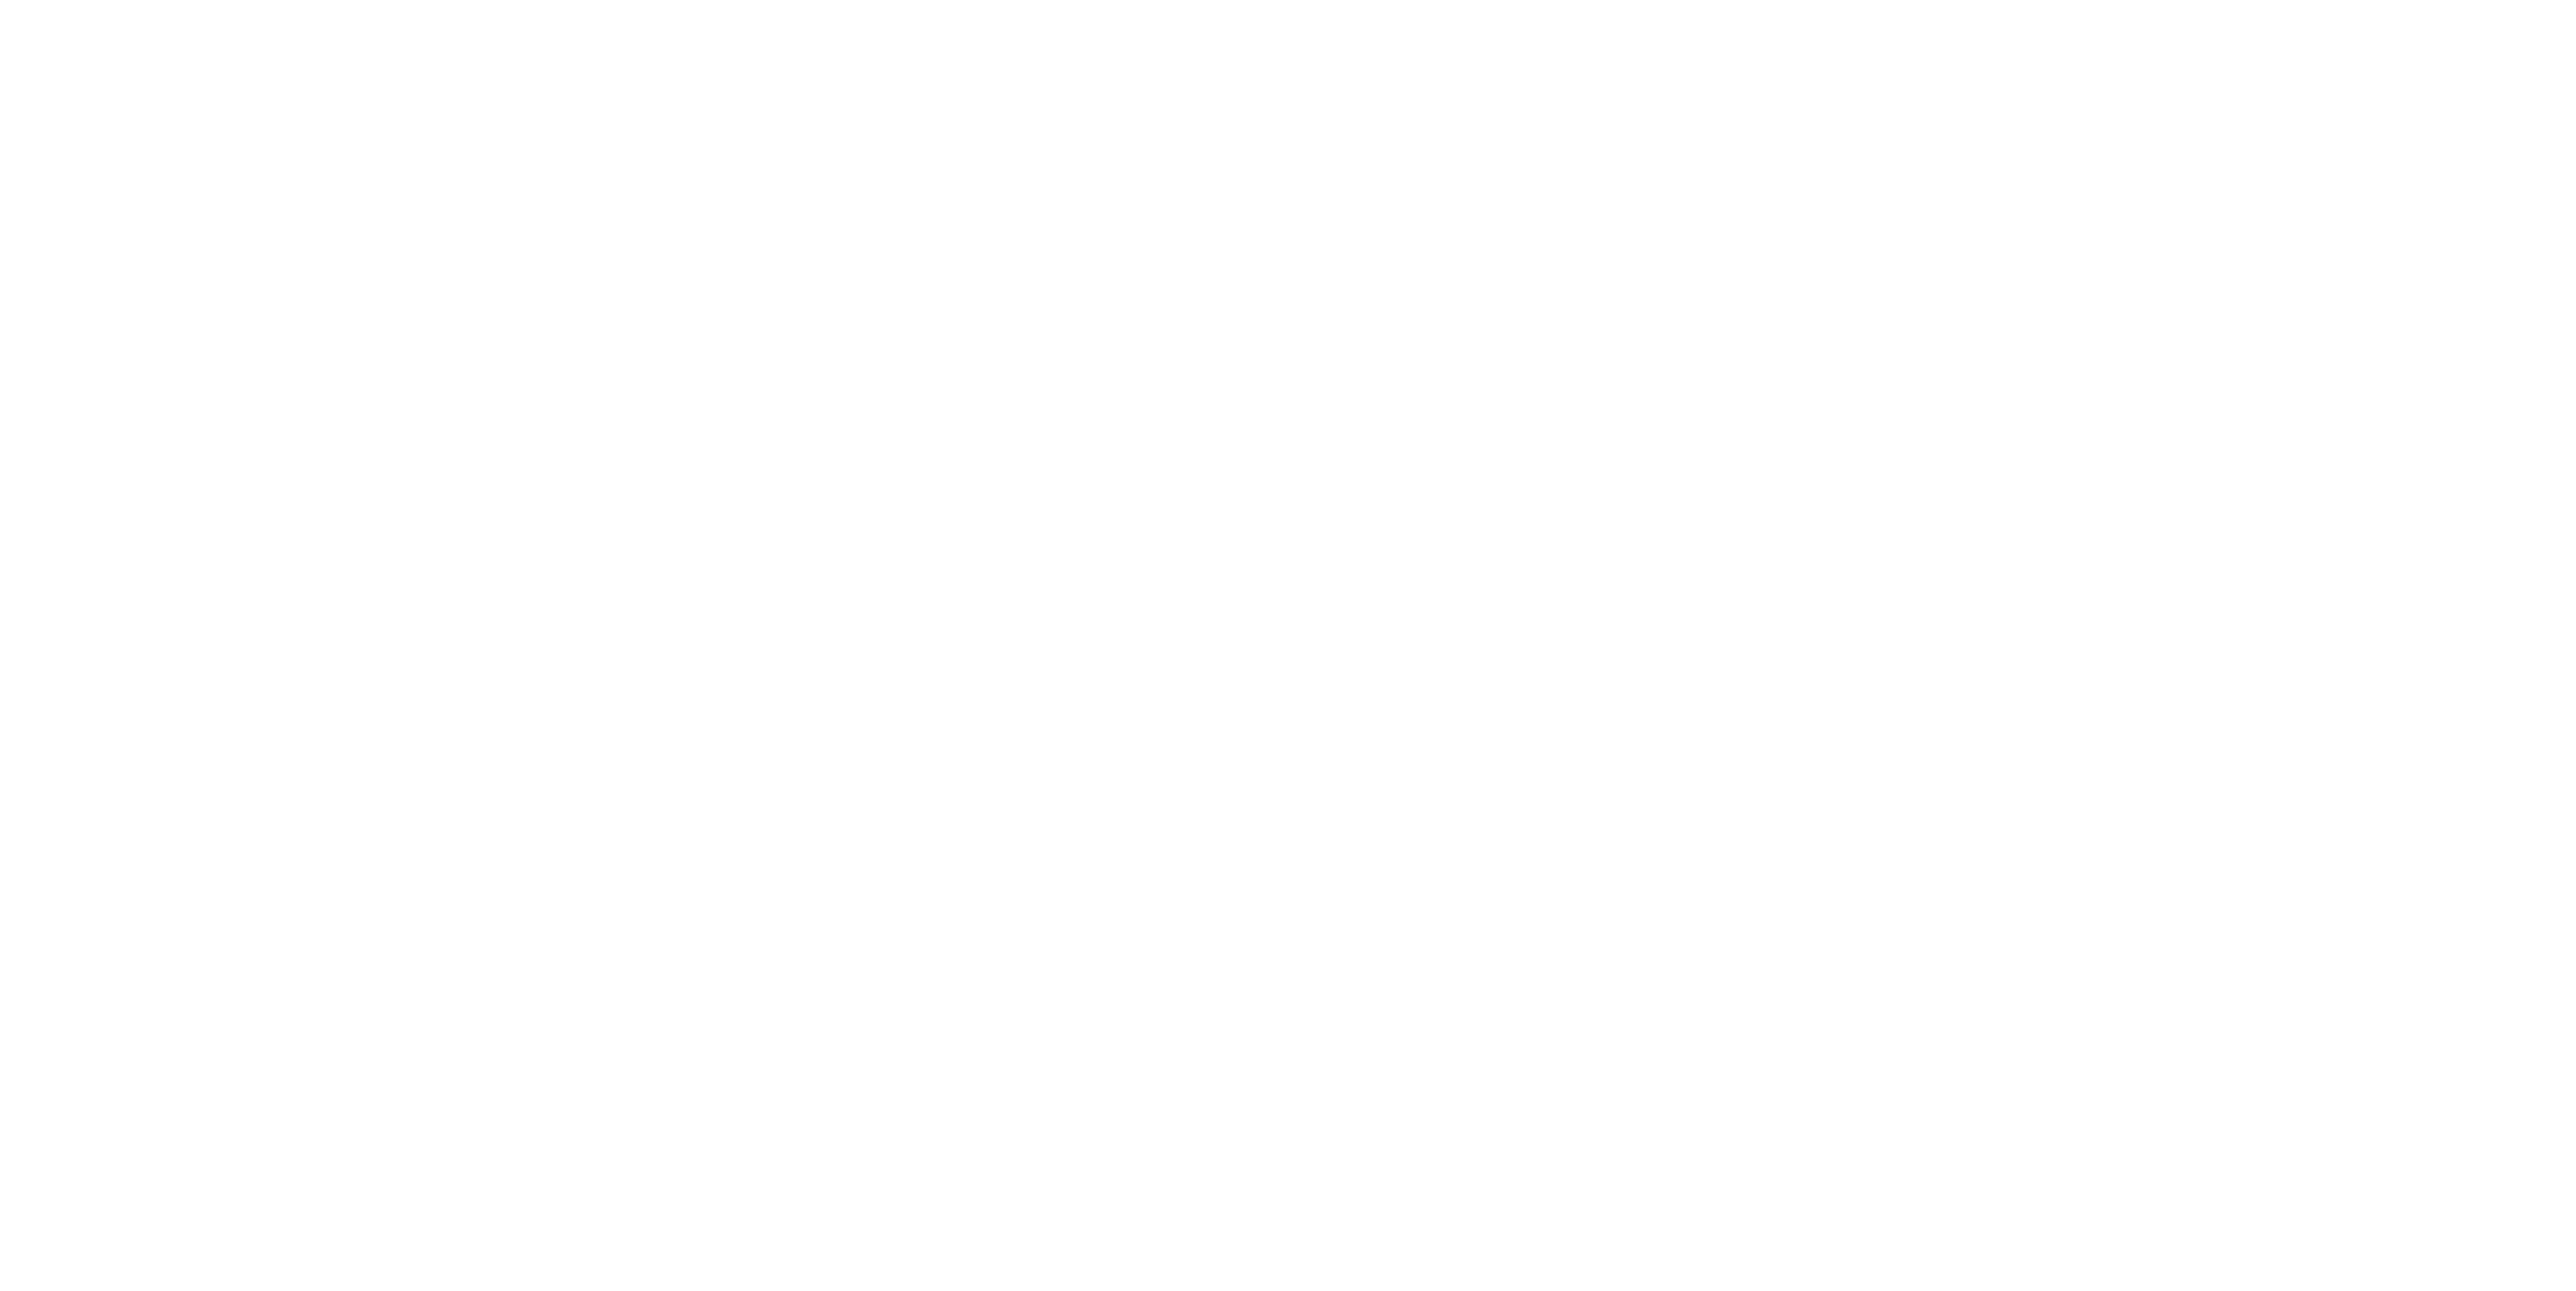 Valens Boutiquee